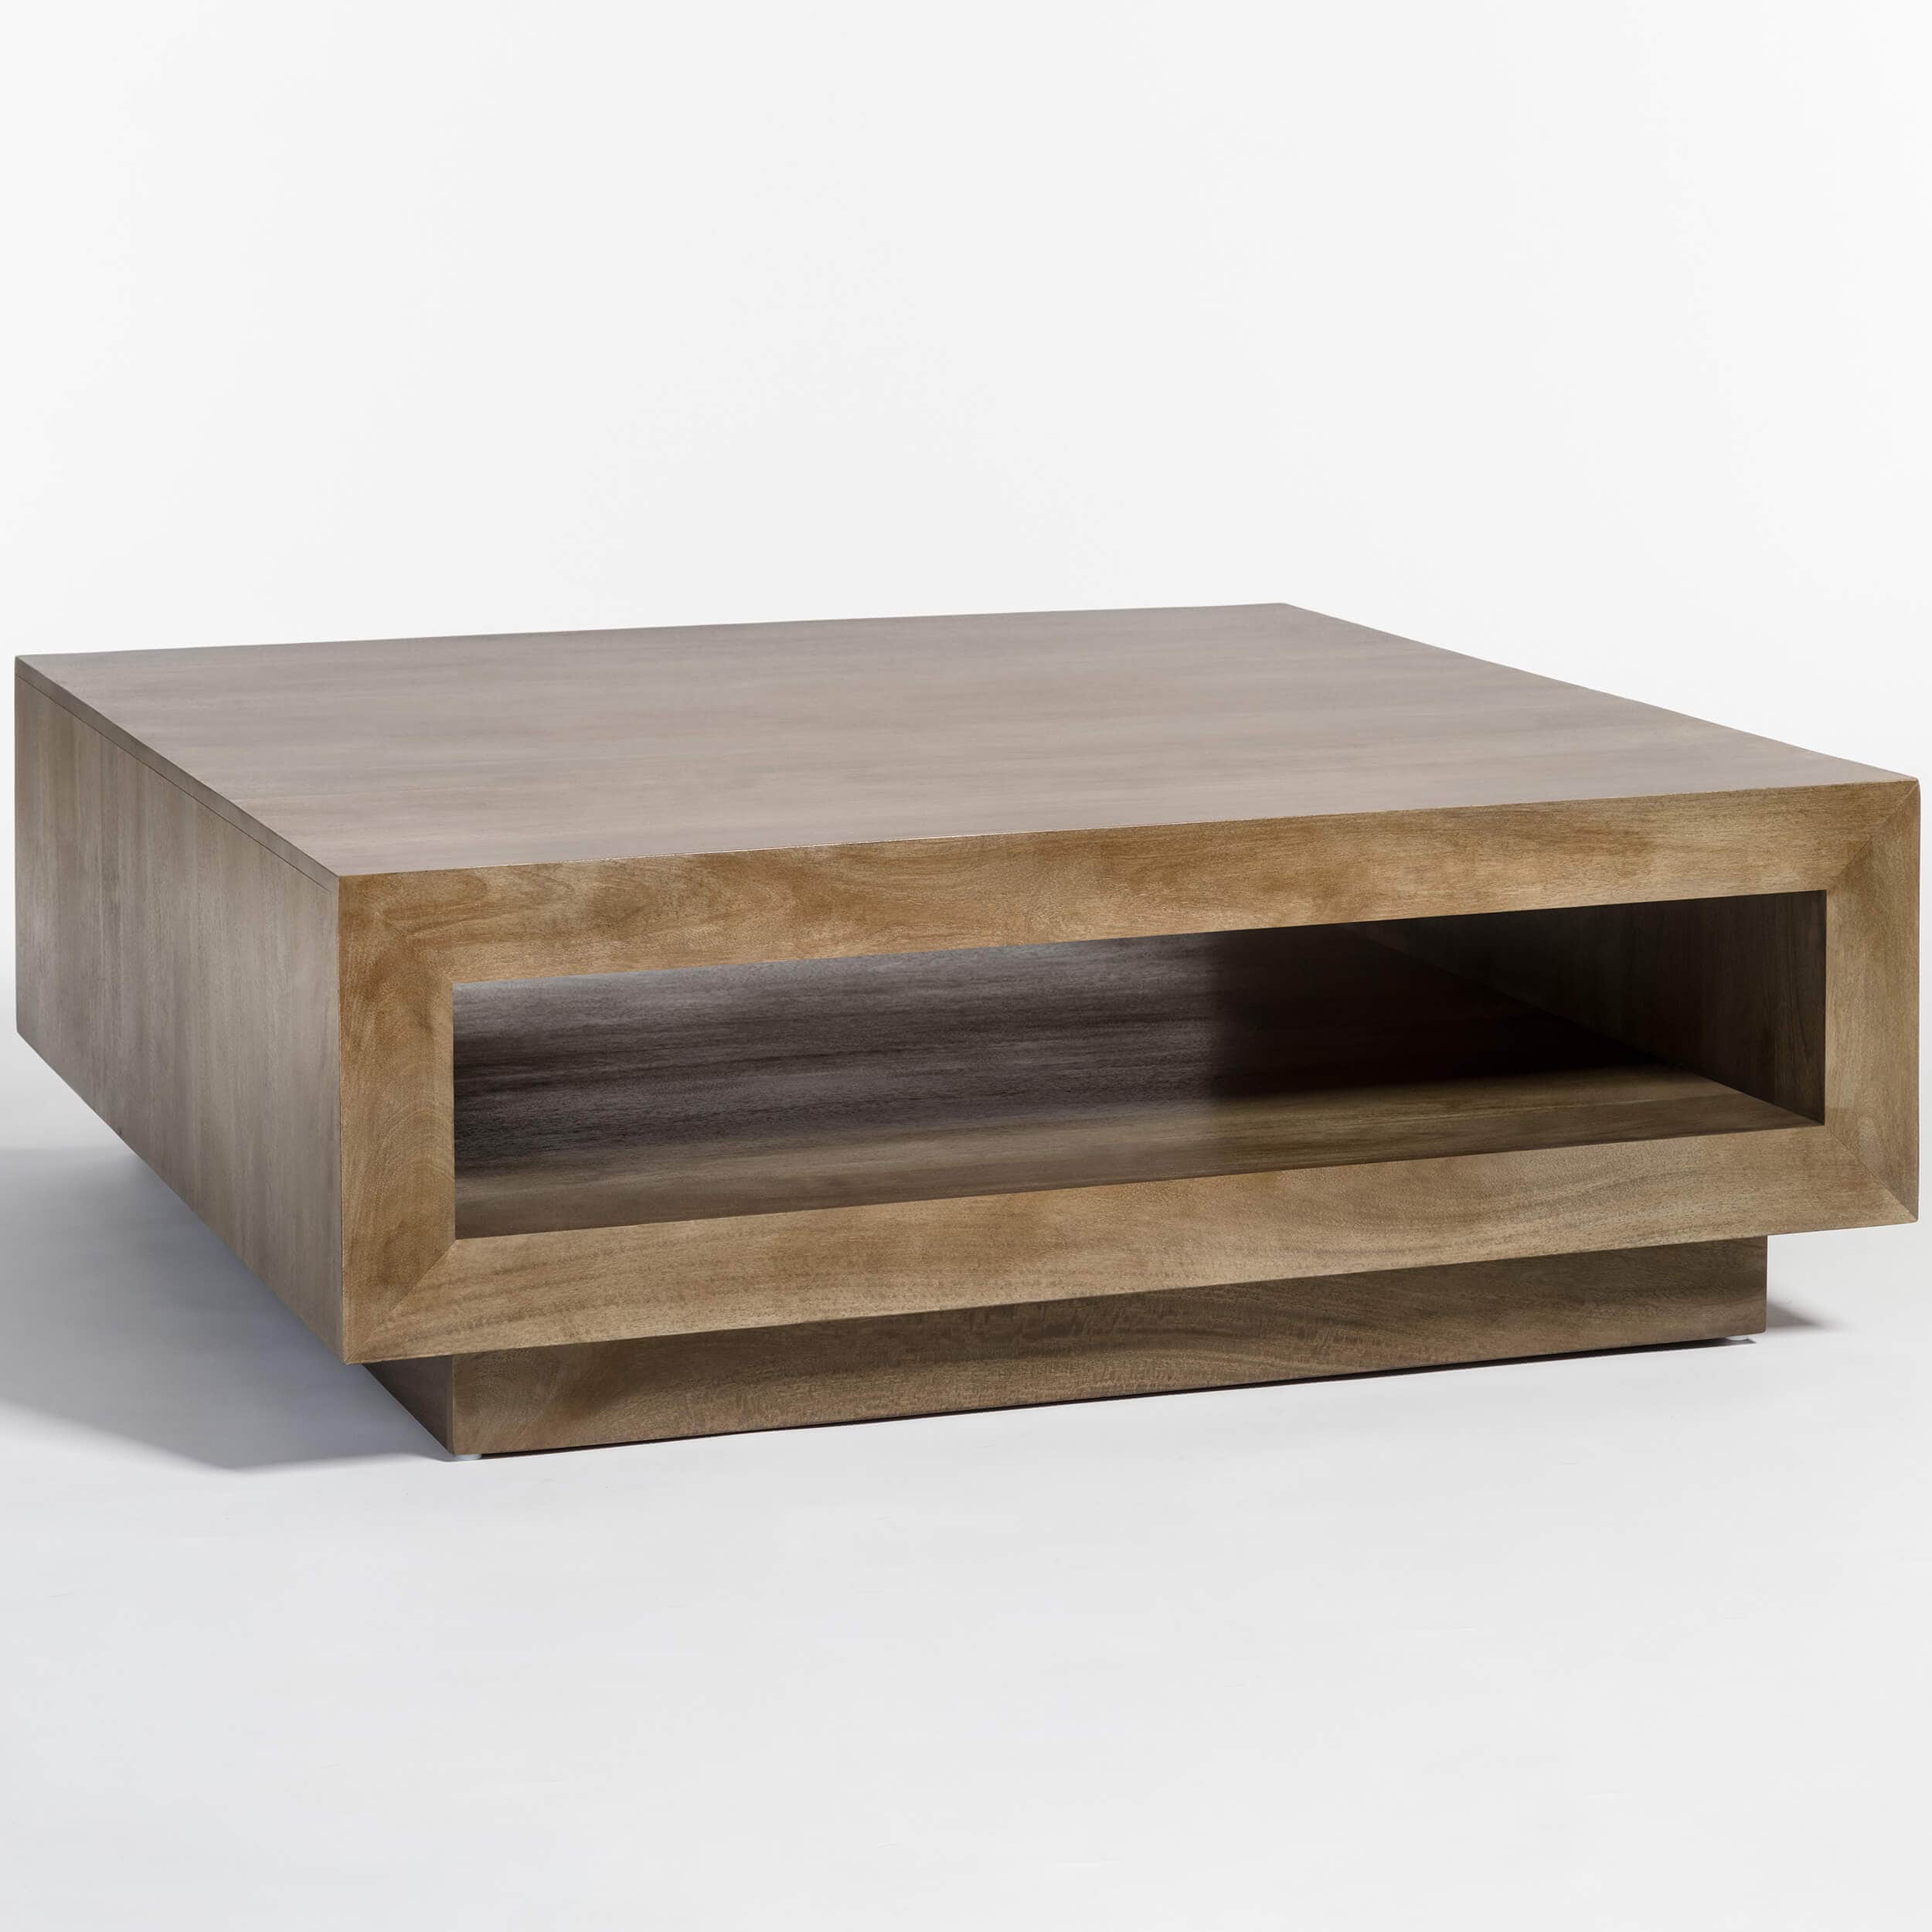 Image of Chicago Coffee Table, Light Ash